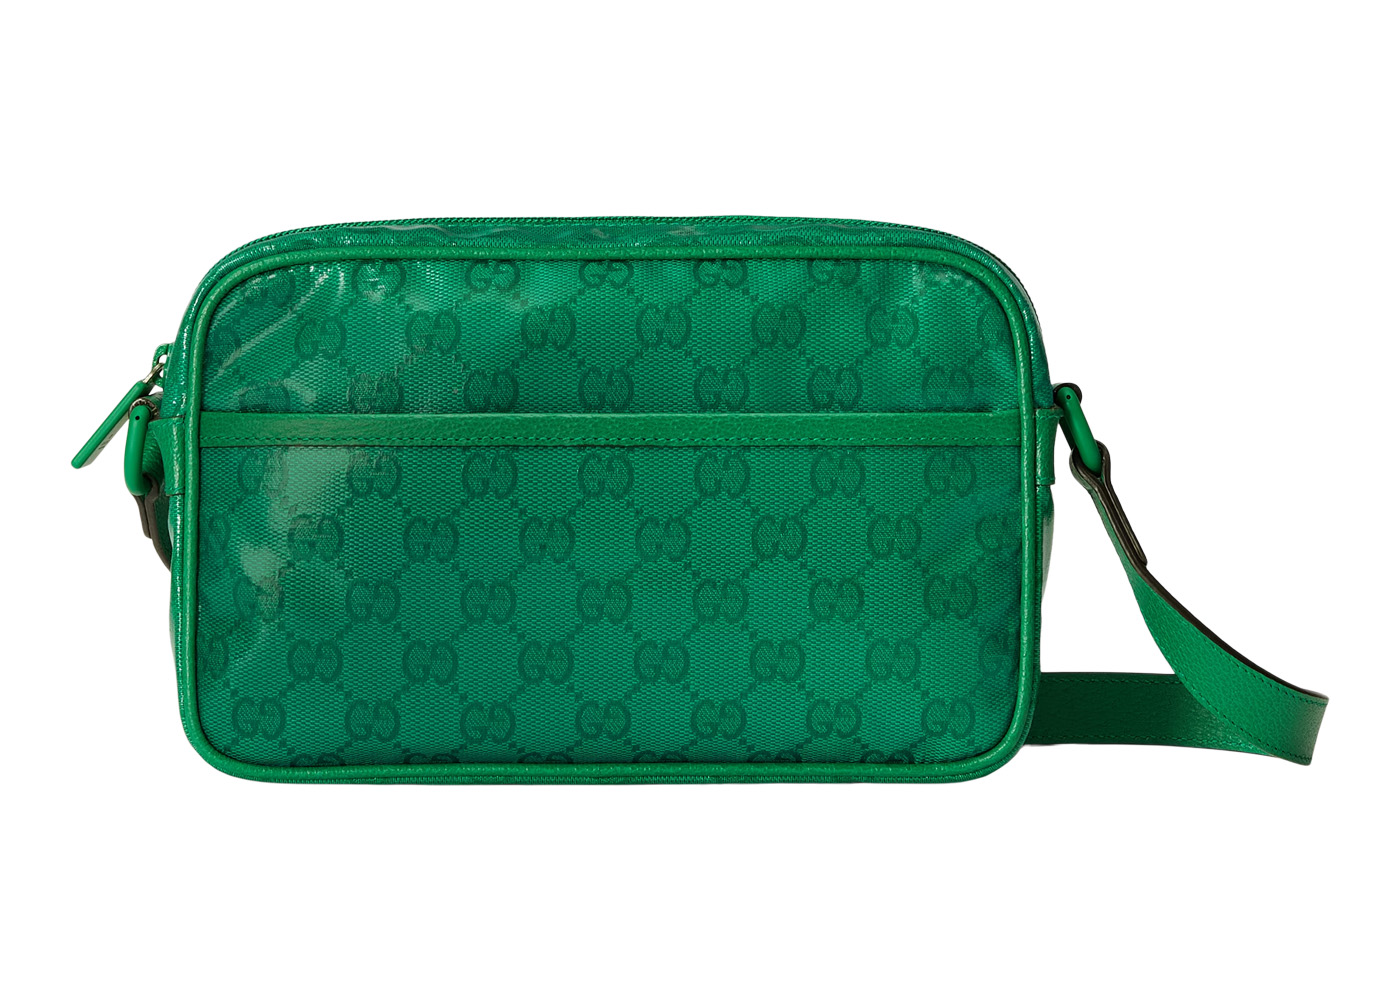 Gucci GG Crystal Mini Shoulder Bag Green in GG Crystal Canvas with